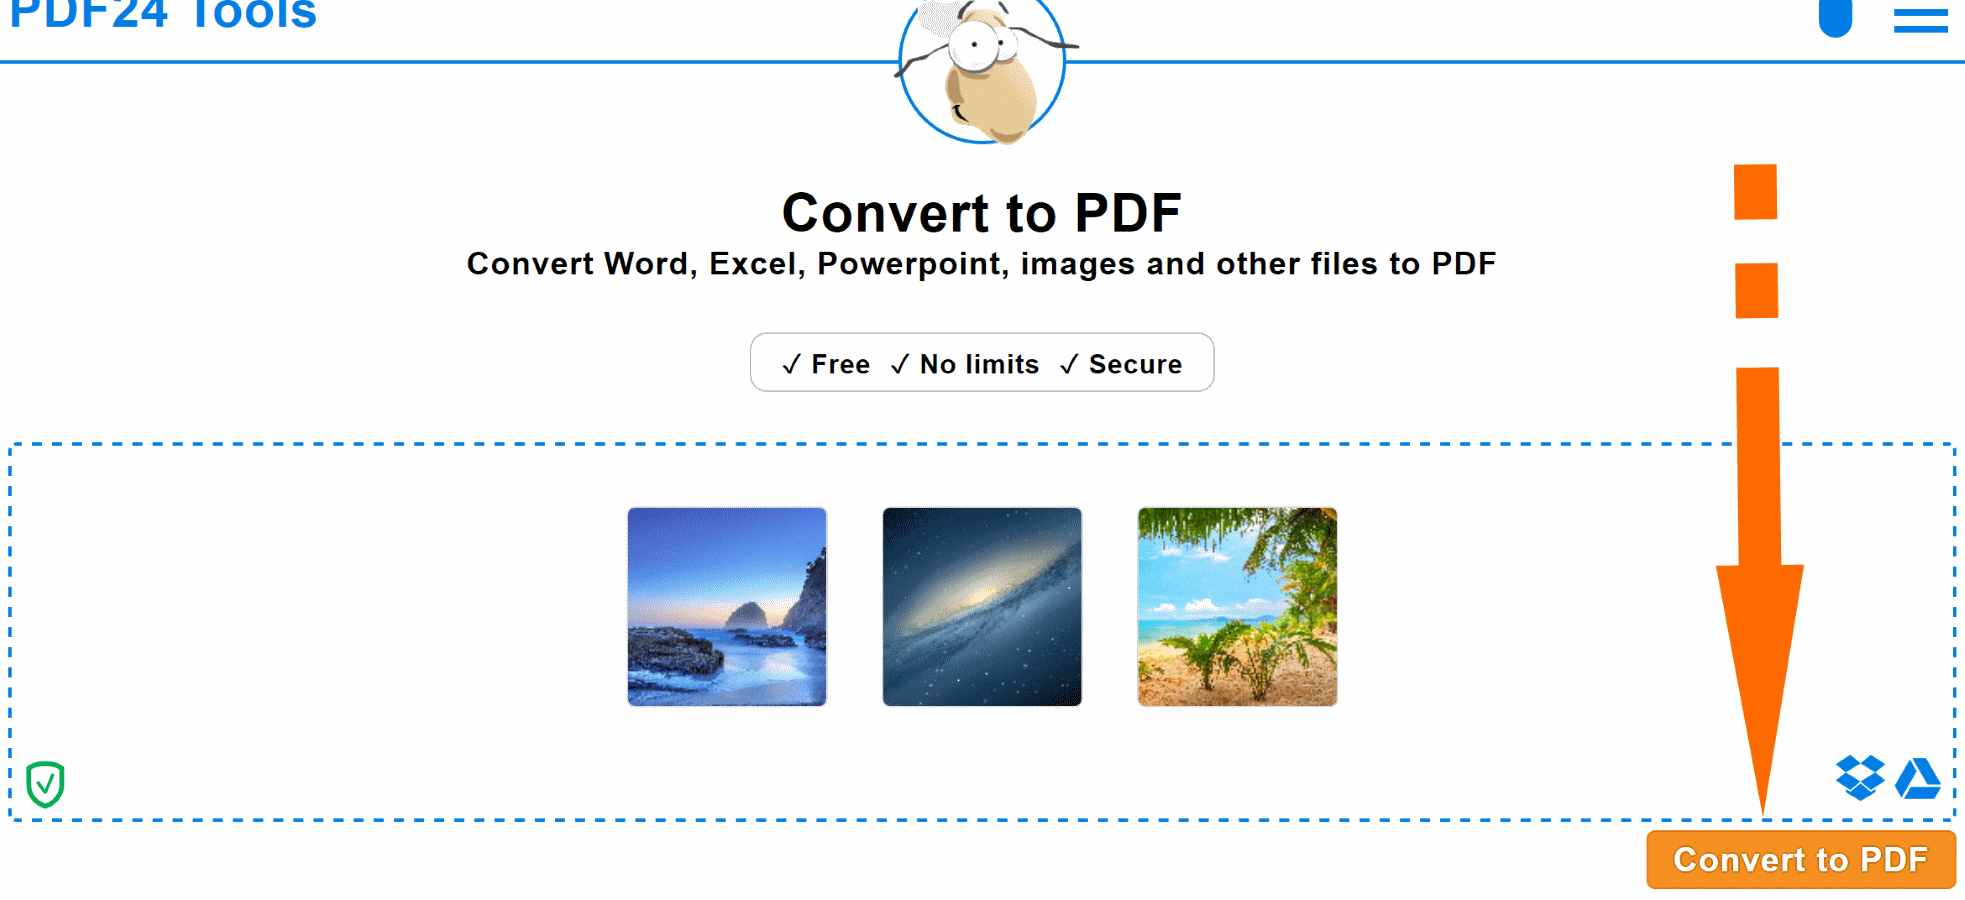 Download Svg To Pdf Converter Quickly Online Free Pdf24 Tools